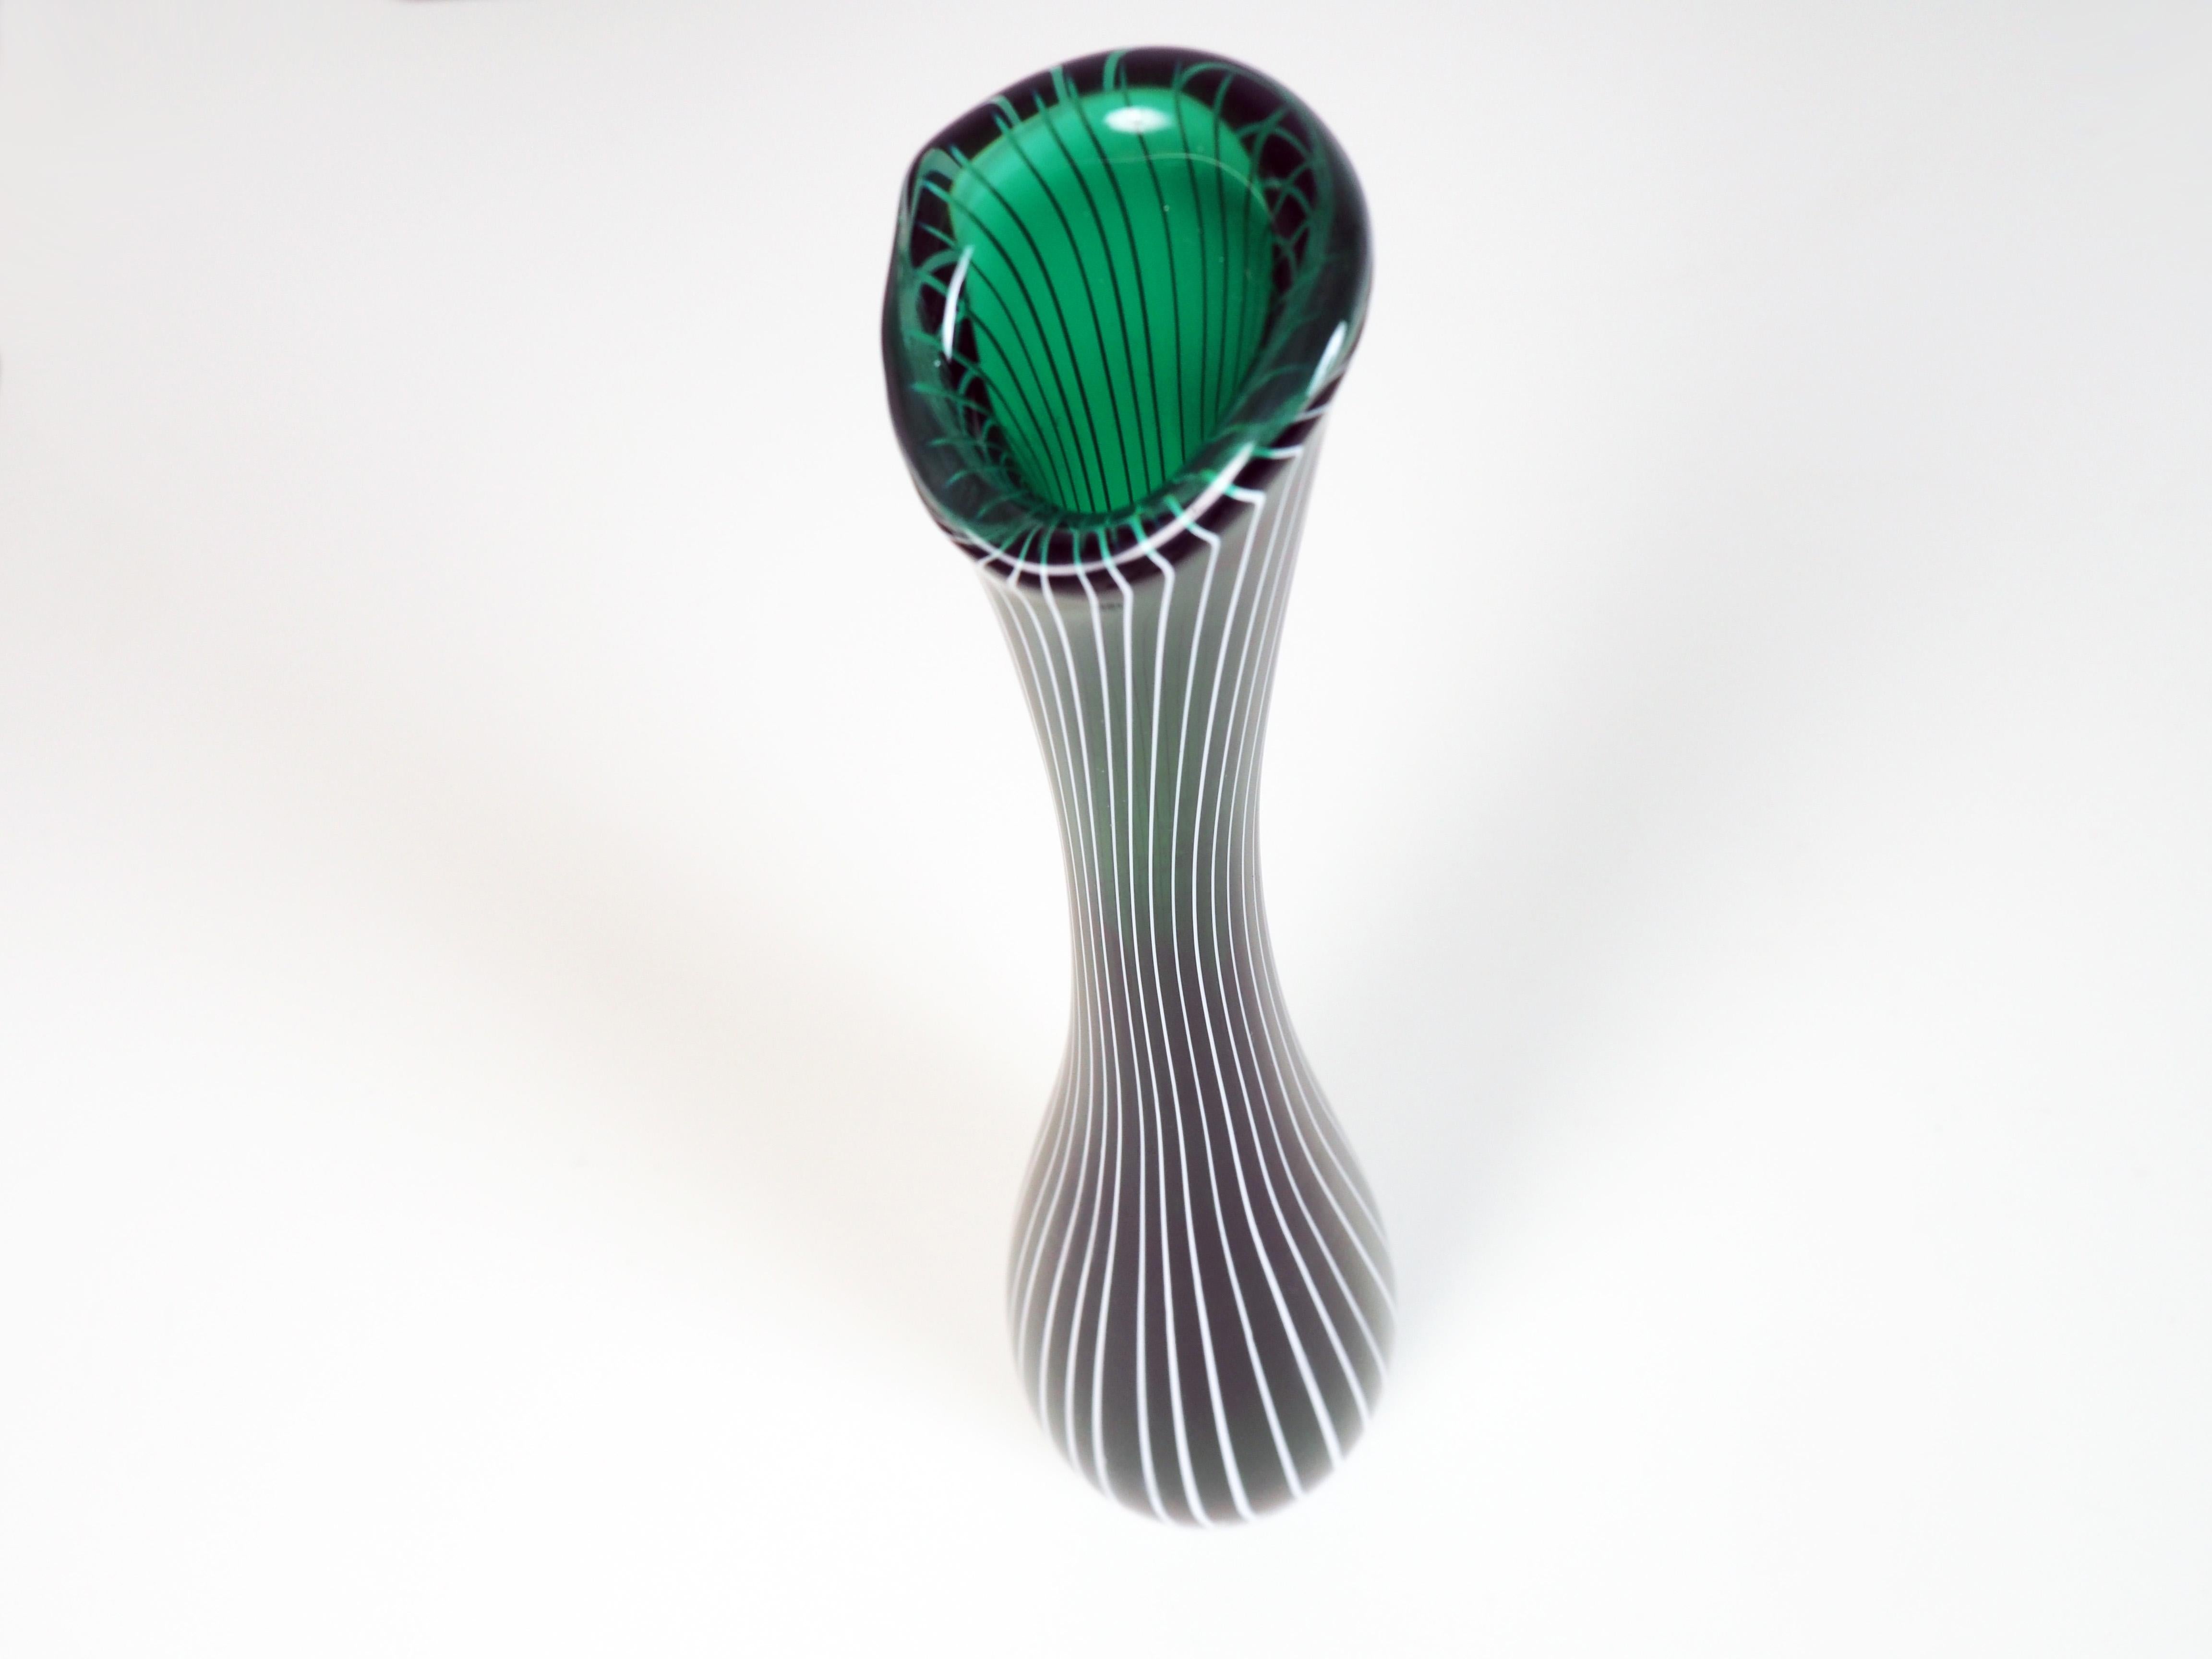 Tall glass vase by the Swedish glass artist Vicke Lindstrand for Kosta Glasbruk. The vase was designed in the 1950s when Vicke Lindstrand returned to his favourite material: handcrafted glass.
The vase is in party green, partly clear glass, with a